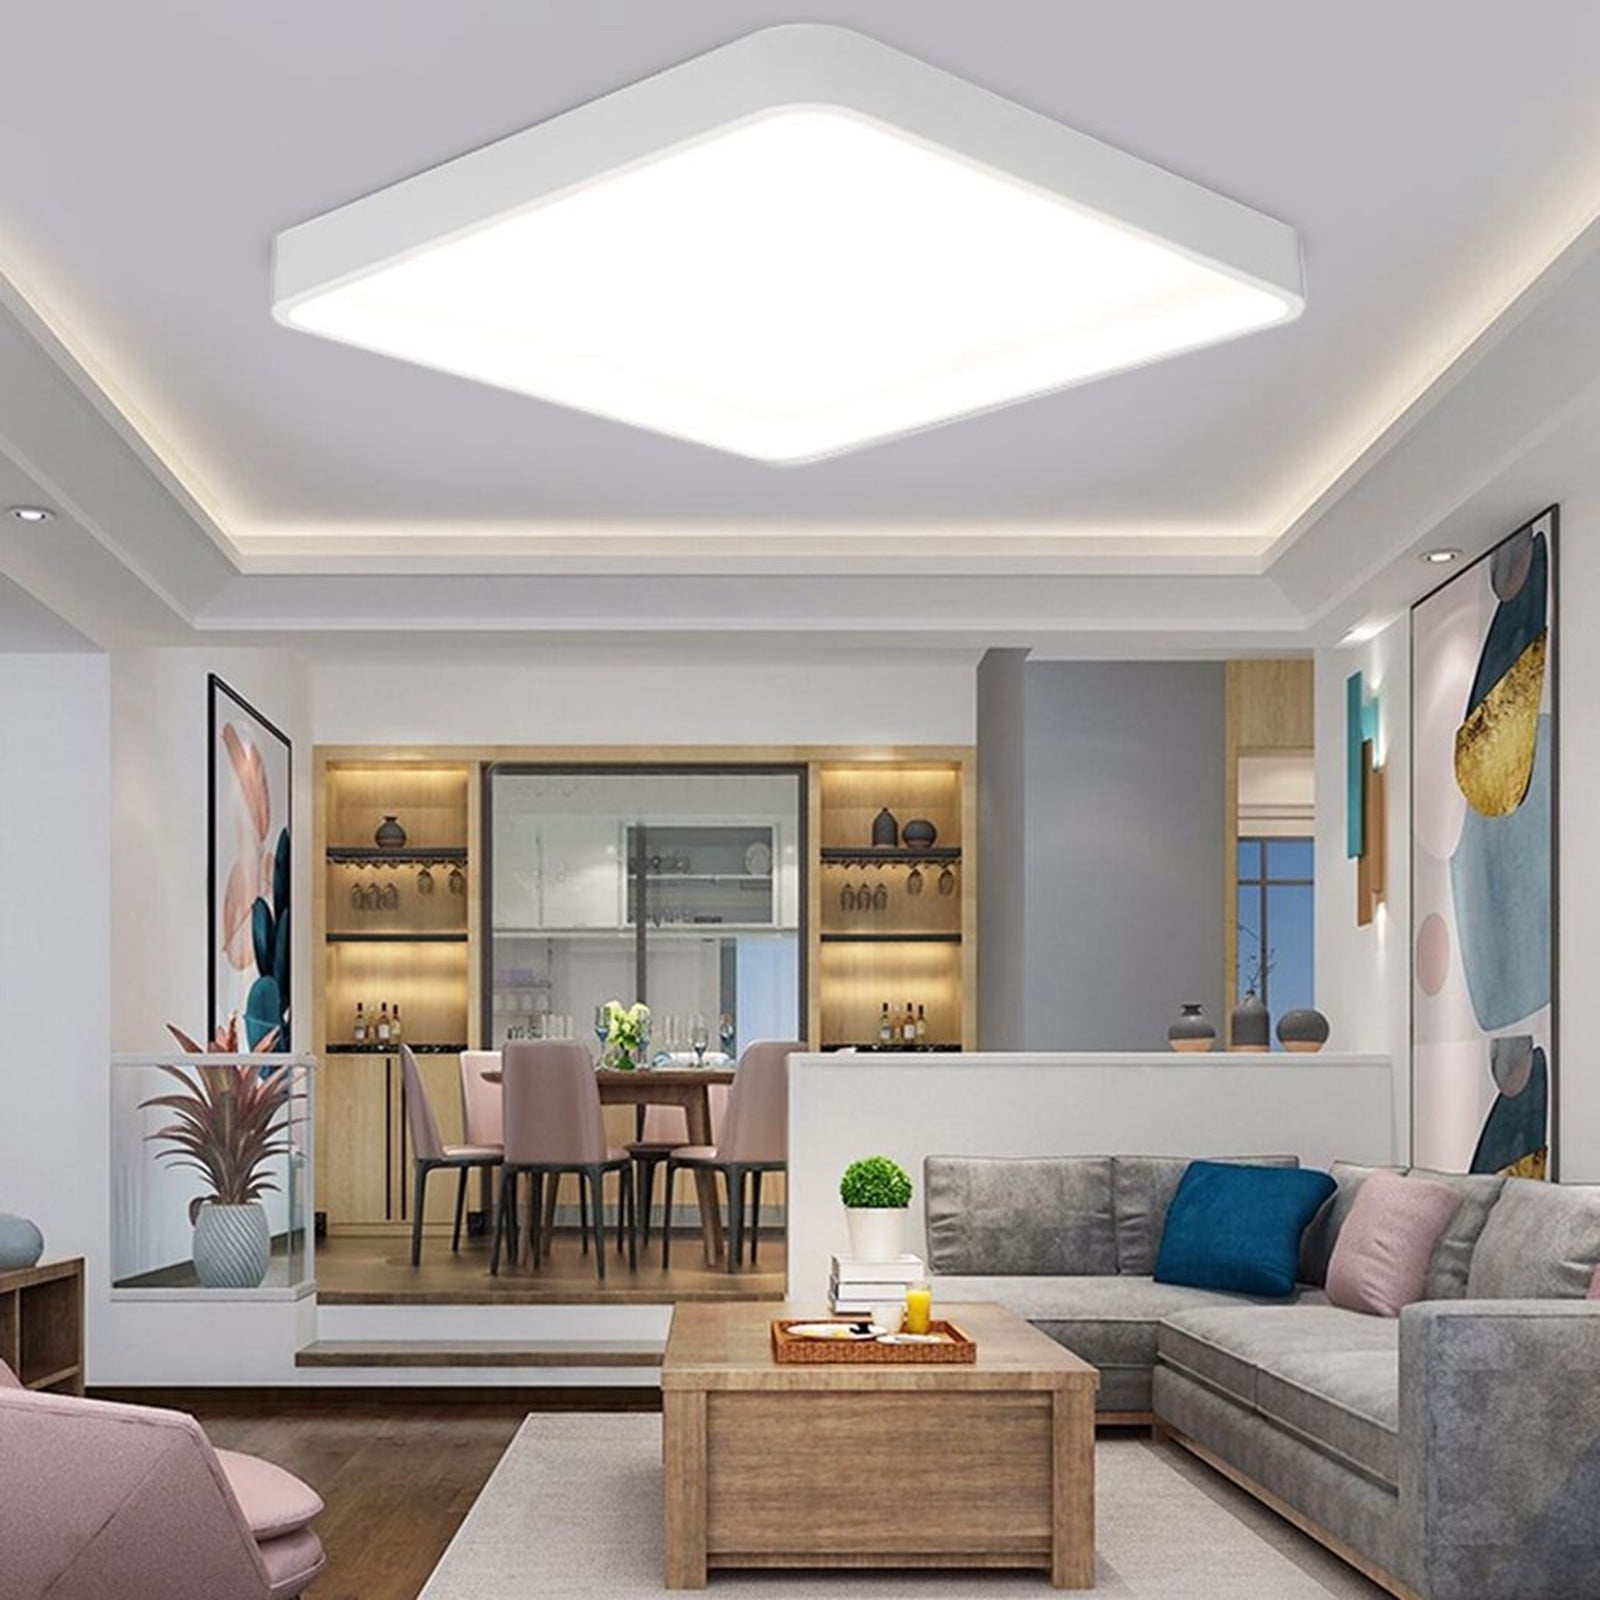 Dimmable LED Ceiling Light Ultra Thin Flush Mount Kitchen Lamp Home Fixture 